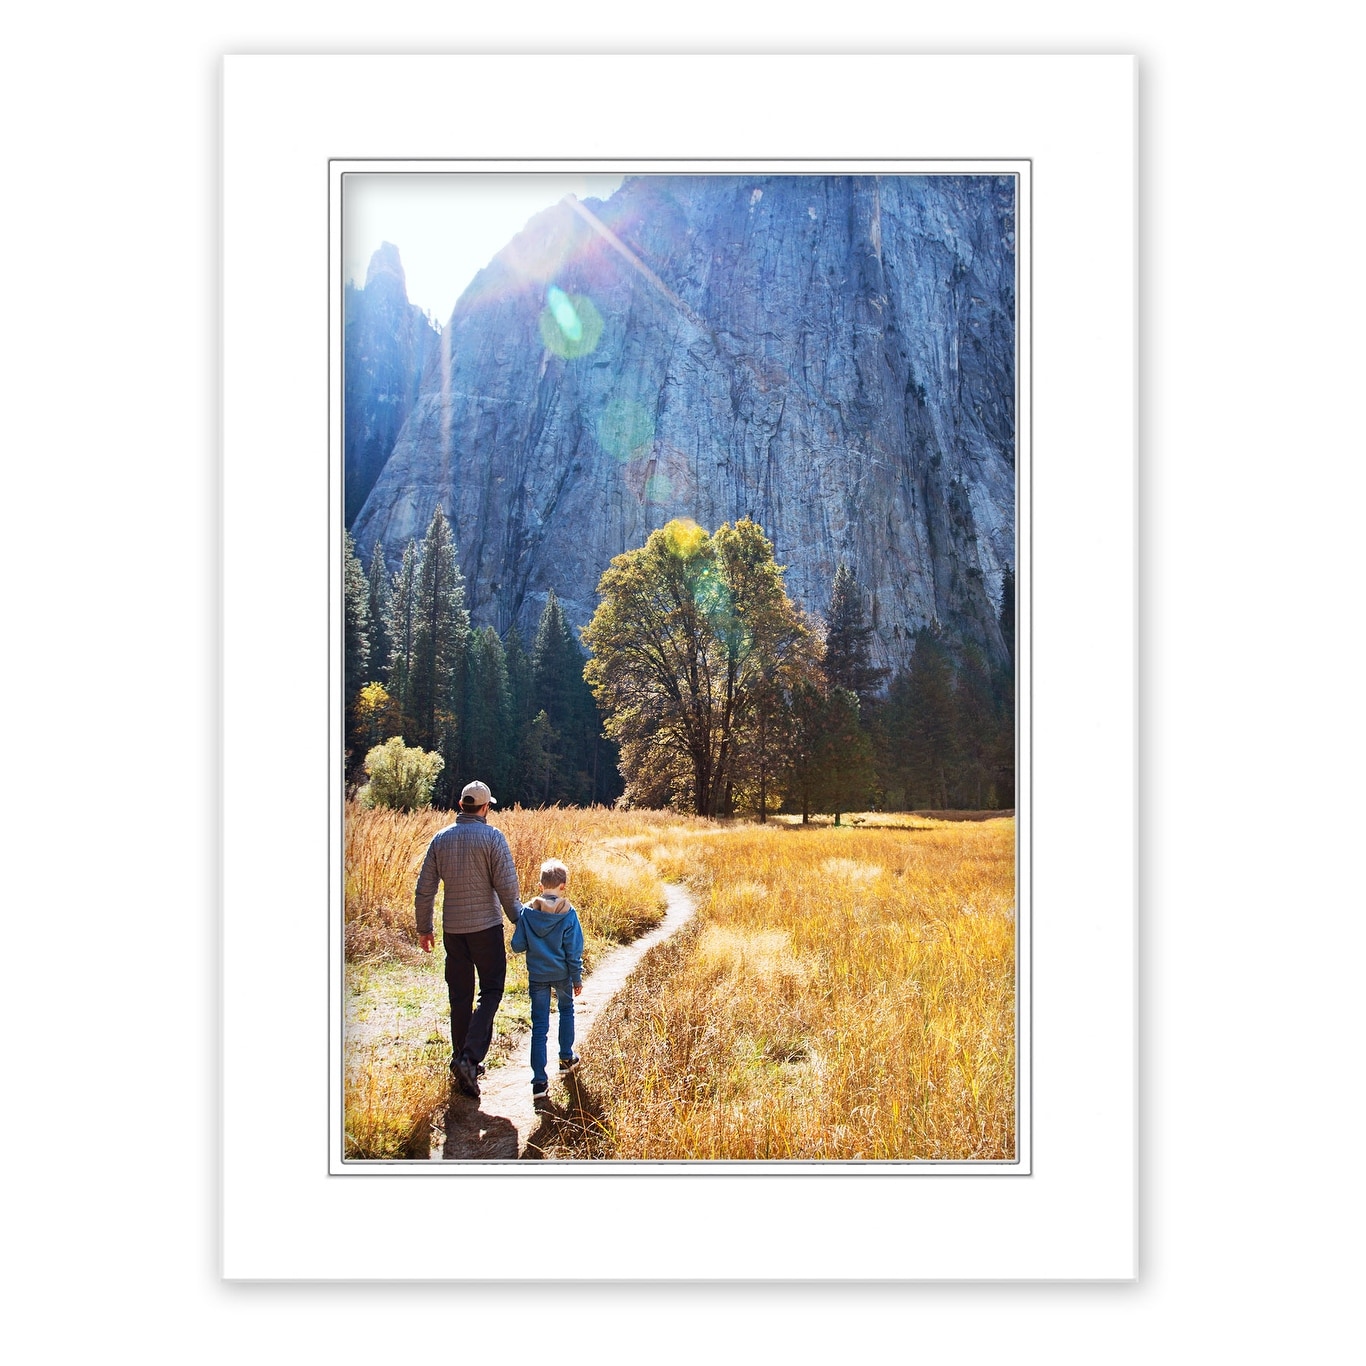 8x10 Mat for 6x8 Photo - White on White Double Mat Matboard for Frames Measuring 8 x 10 in - to Display Art Measuring 6 x 8 in